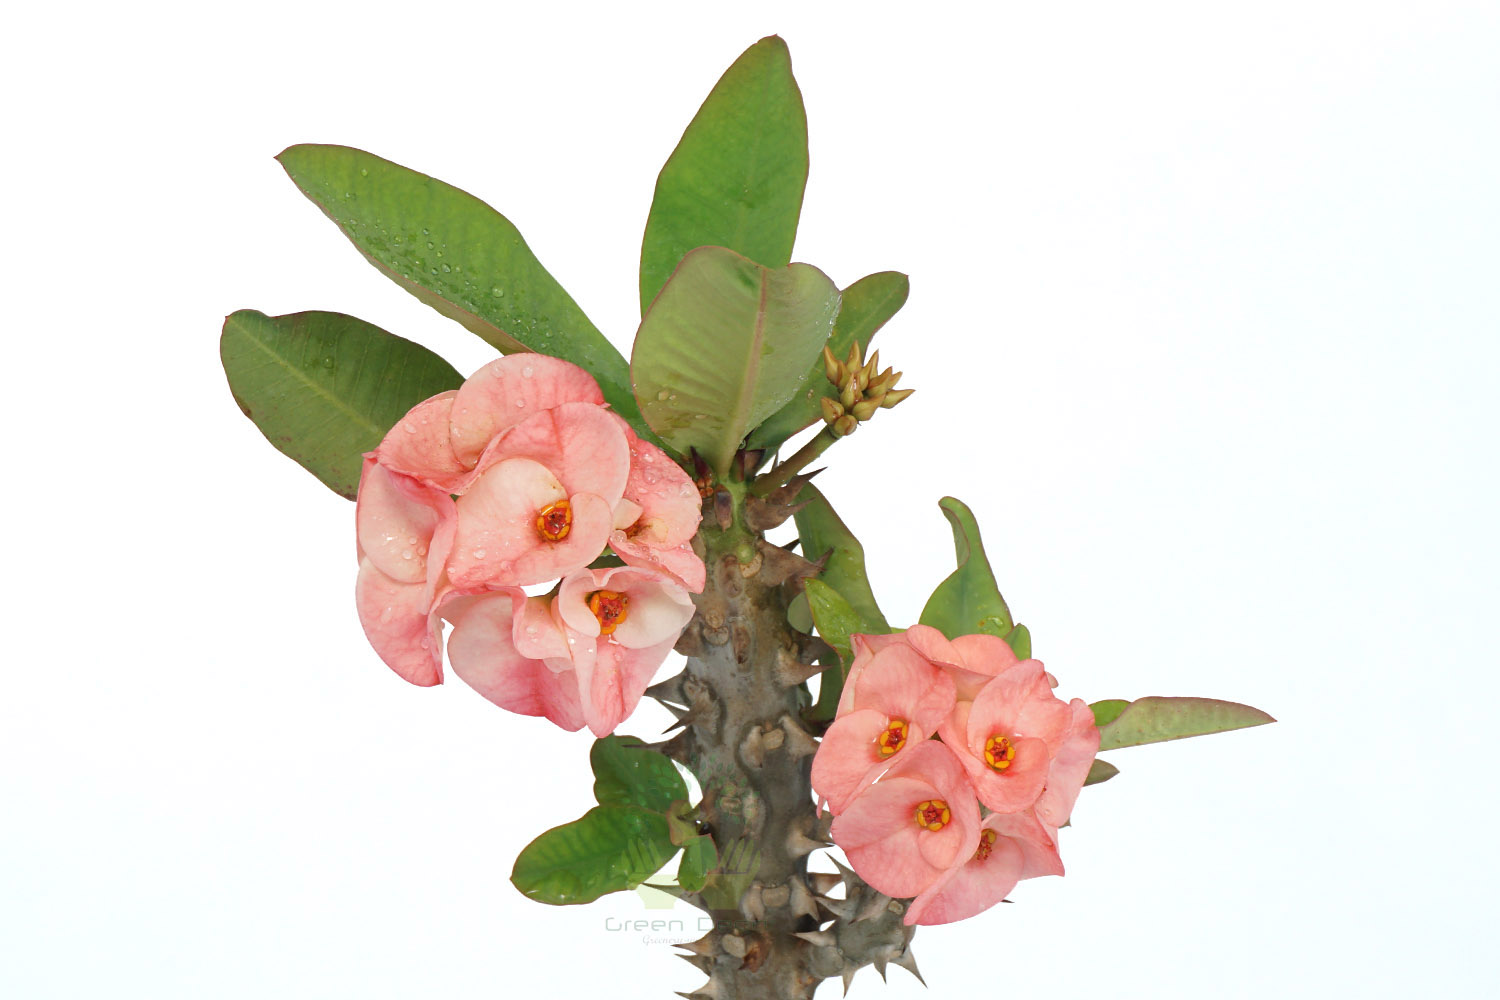 Buy Euphorbia Milli-Pink Plants , White Pots and seeds in Delhi NCR by the best online nursery shop Greendecor.